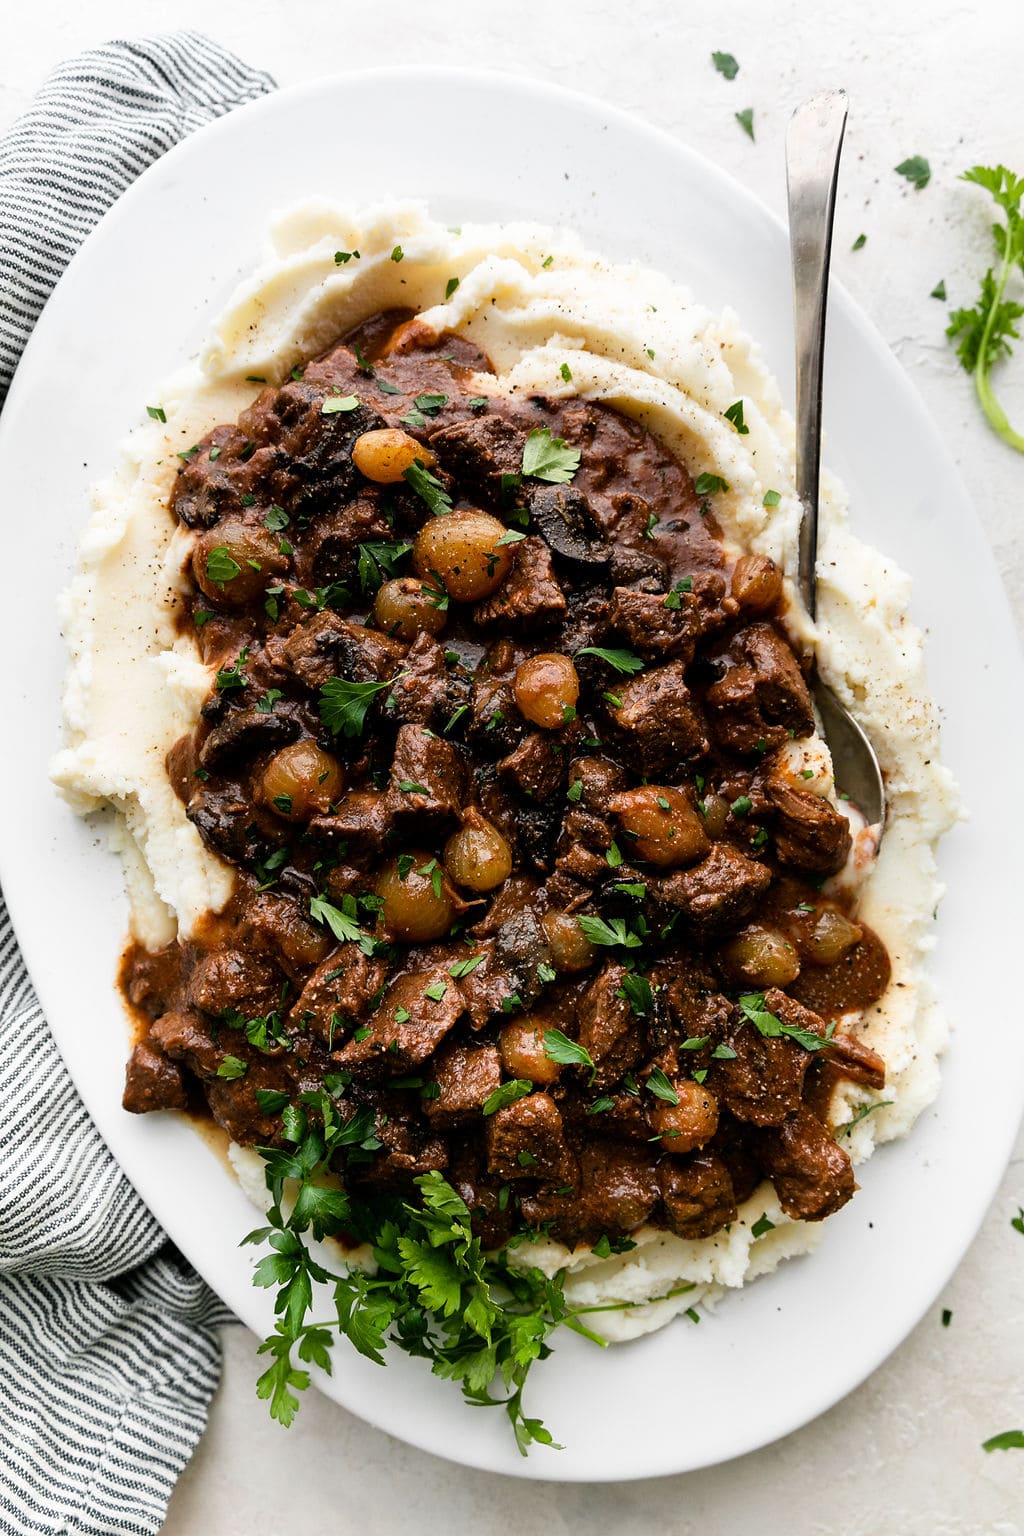 https://therealfooddietitians.com/wp-content/uploads/2021/11/Slow-Cooker-Beef-Tips-with-Gravy-4.jpg